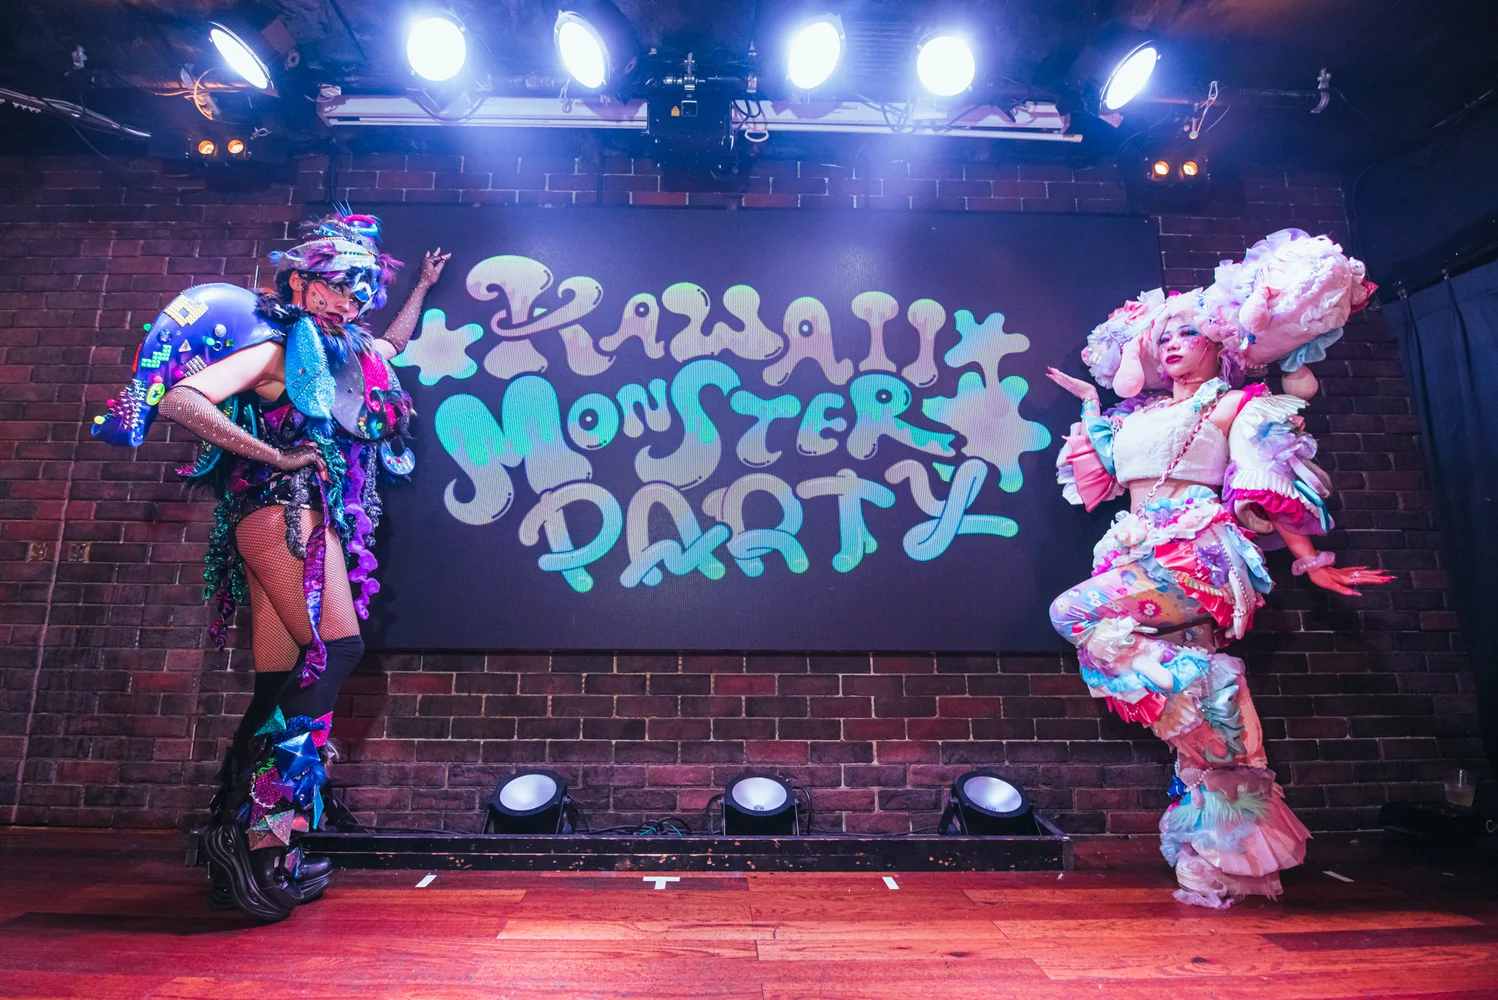 Kawaii Monster Party Feb 23, 2023 | 5% Off Same-Day Tickets On-Site